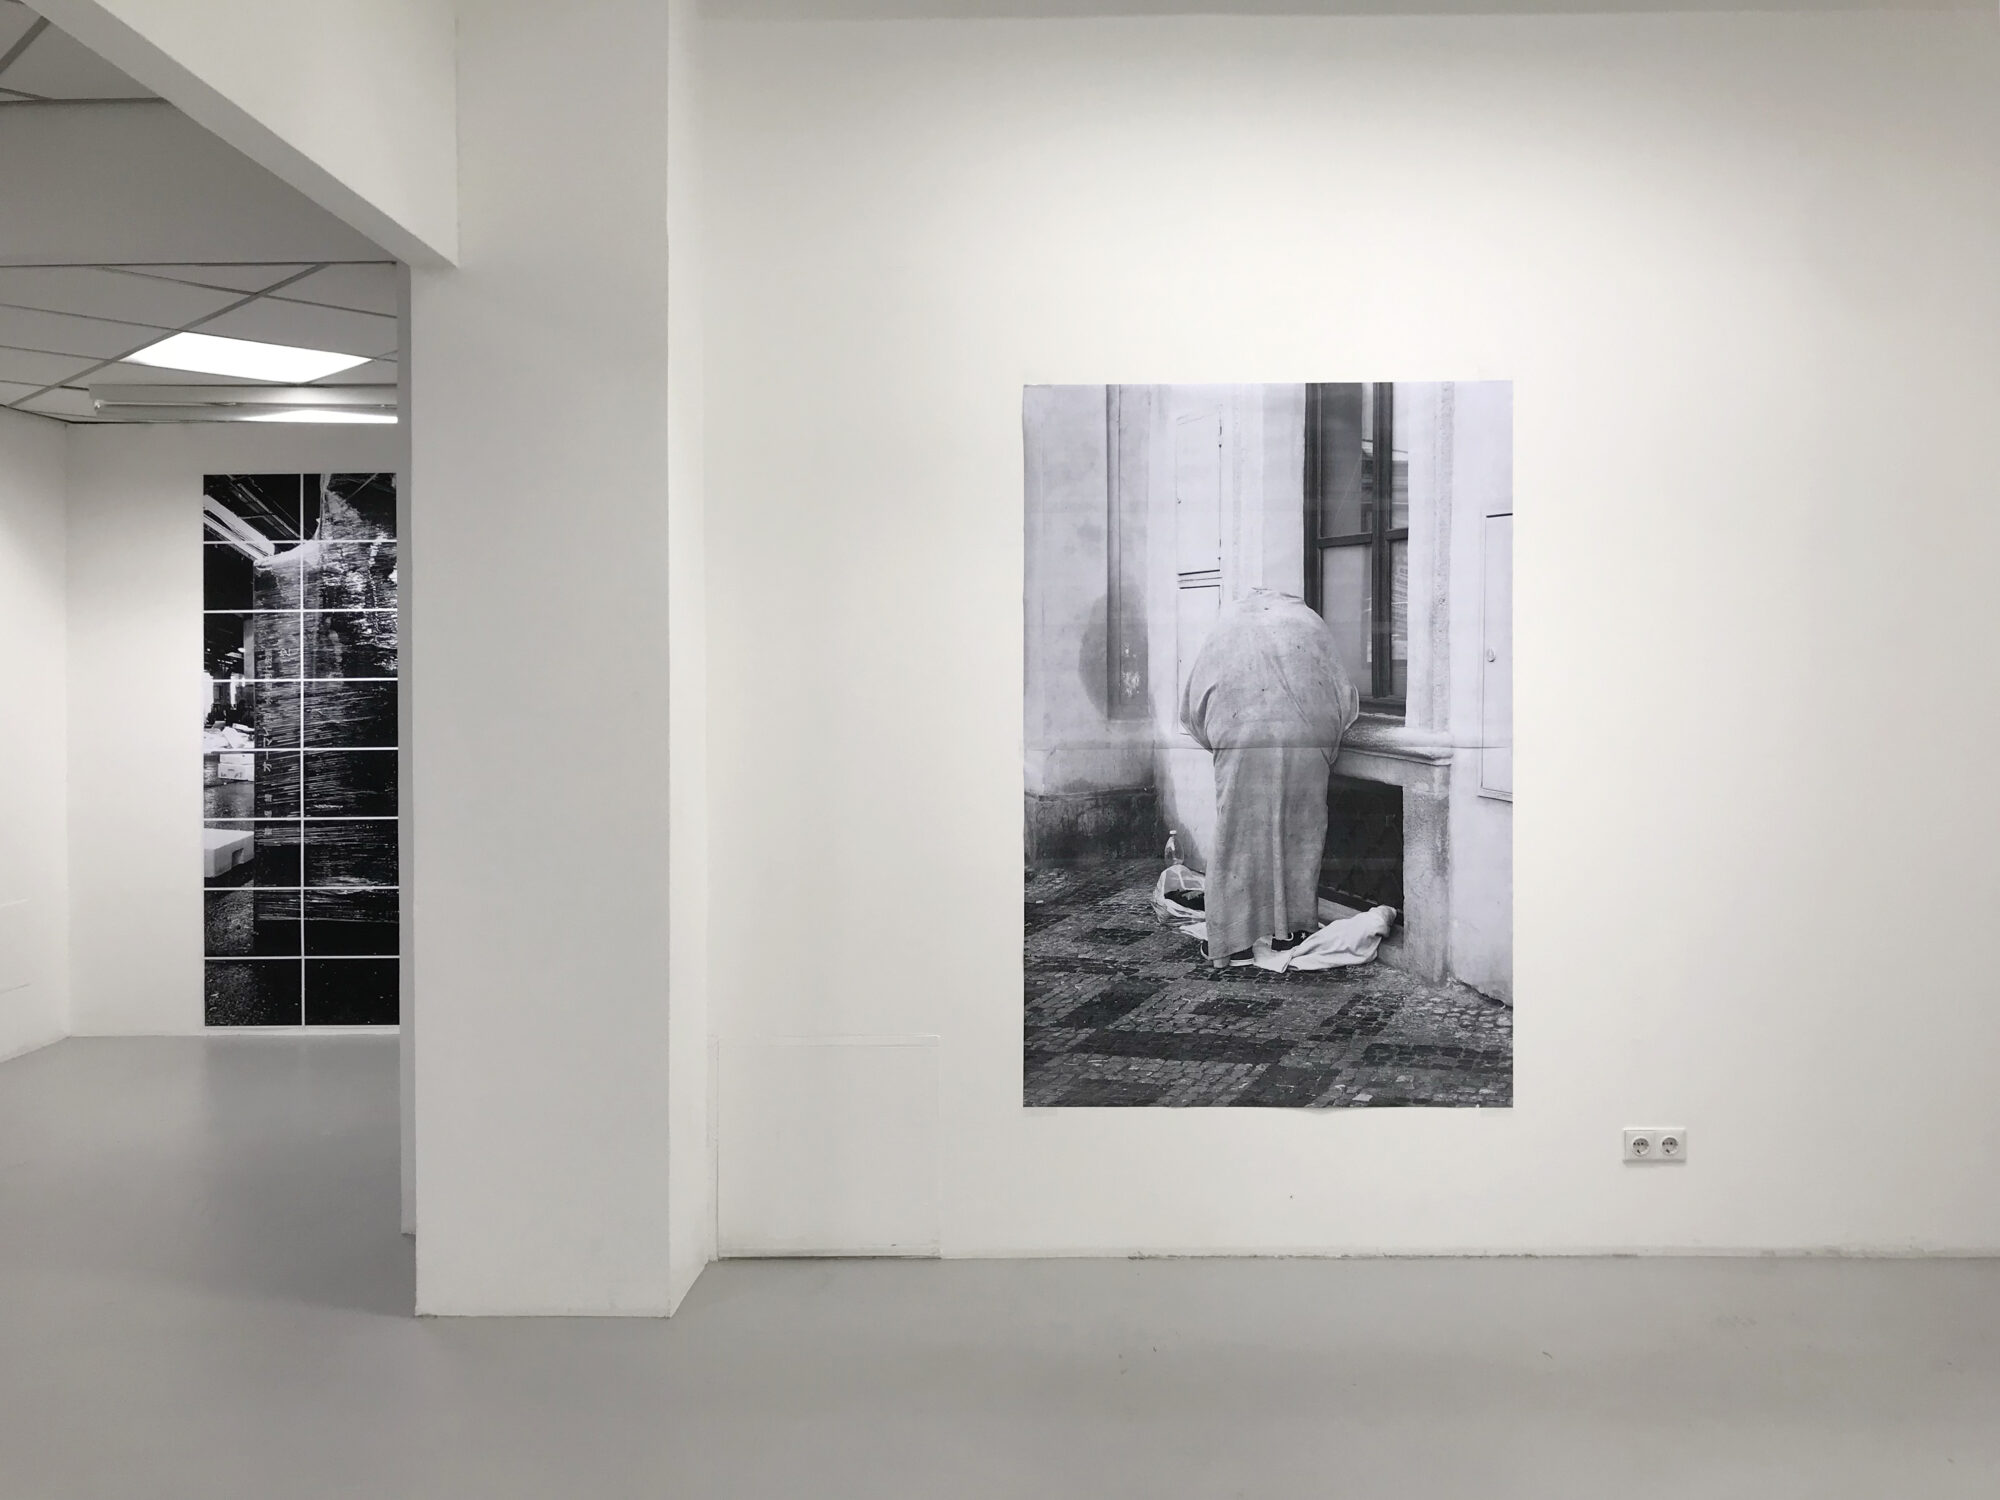 from the series Máj/My, exhibition verschwindet, Galerie Ursula Walter, 2019<br />
laser print, 178 x 118,7 cm<br />
in the background: work by Andreas Schulze<br />
foto: Andreas Schulze<br />
